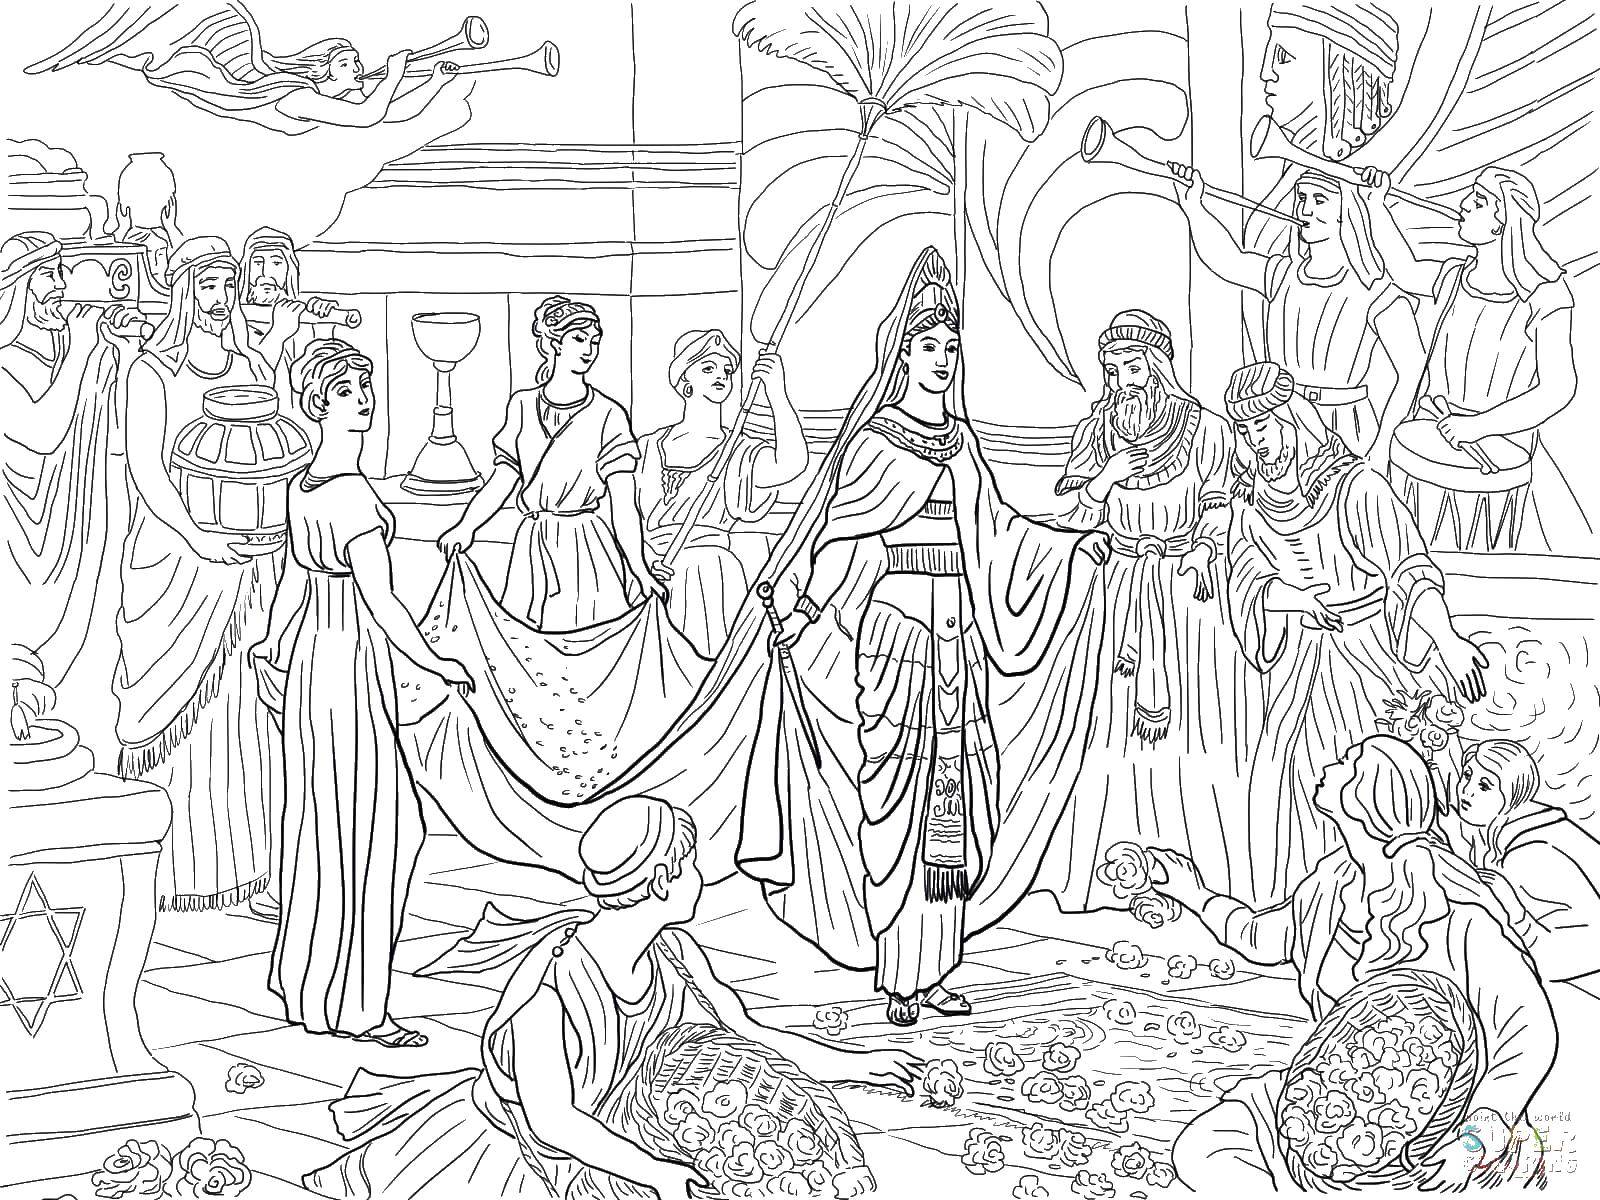 Coloring The reception of king. Category the king and Queen. Tags:  the king, Queen, Kingdom, welcome.